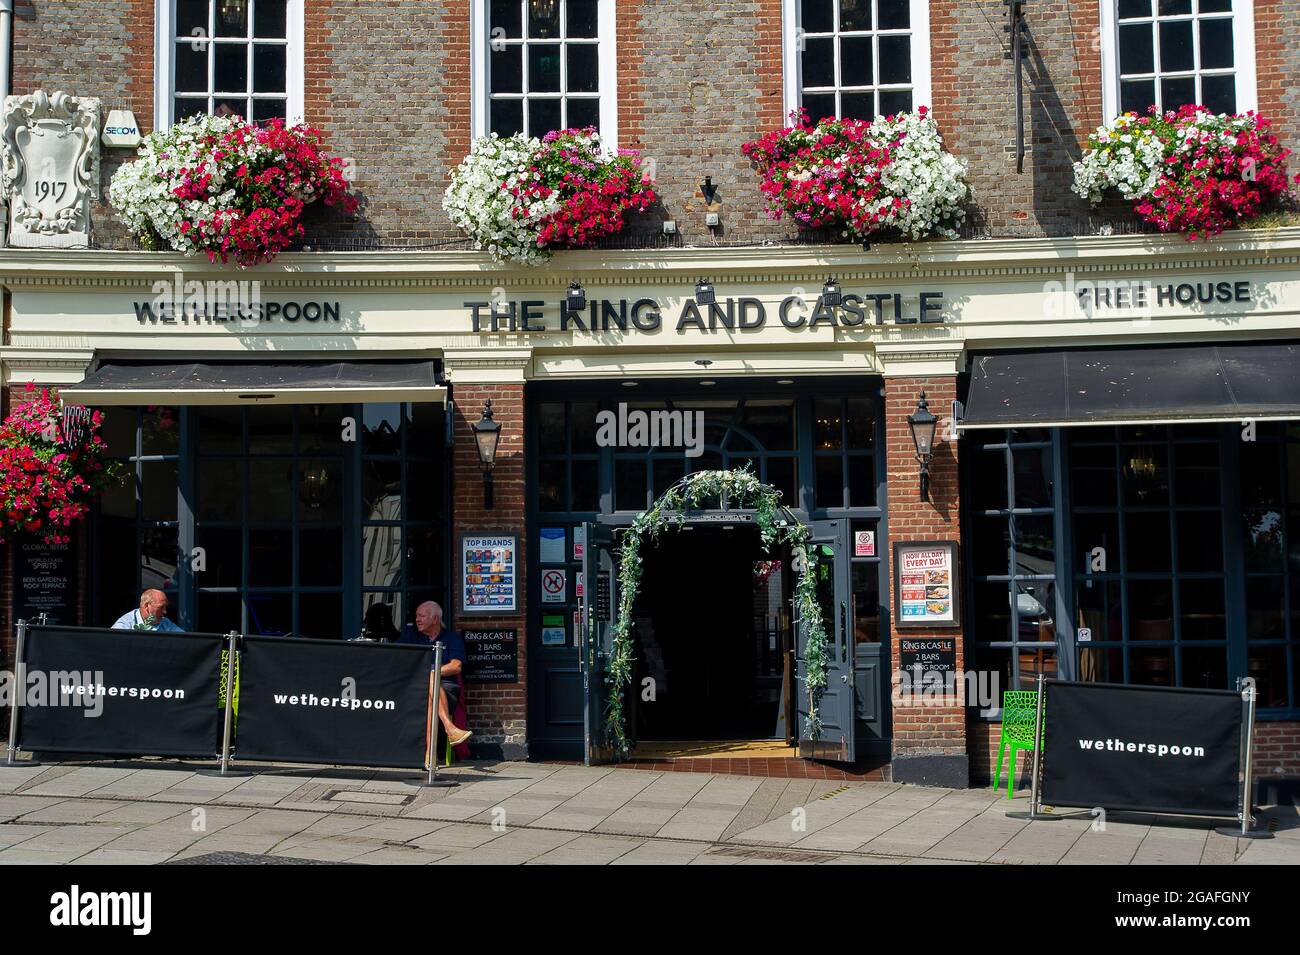 Windsor, Berkshire, UK. 26th July, 2021. The King and Castle Wetherspoon pub in Windsor. Tim Martin of pub chain J D Wetherspoon has reportedly warned that the post Covid-19 recovery is likely to be set of course due to the NHS Covid-19 Test and Trace app pings. Credit: Maureen McLean/Alamy Stock Photo